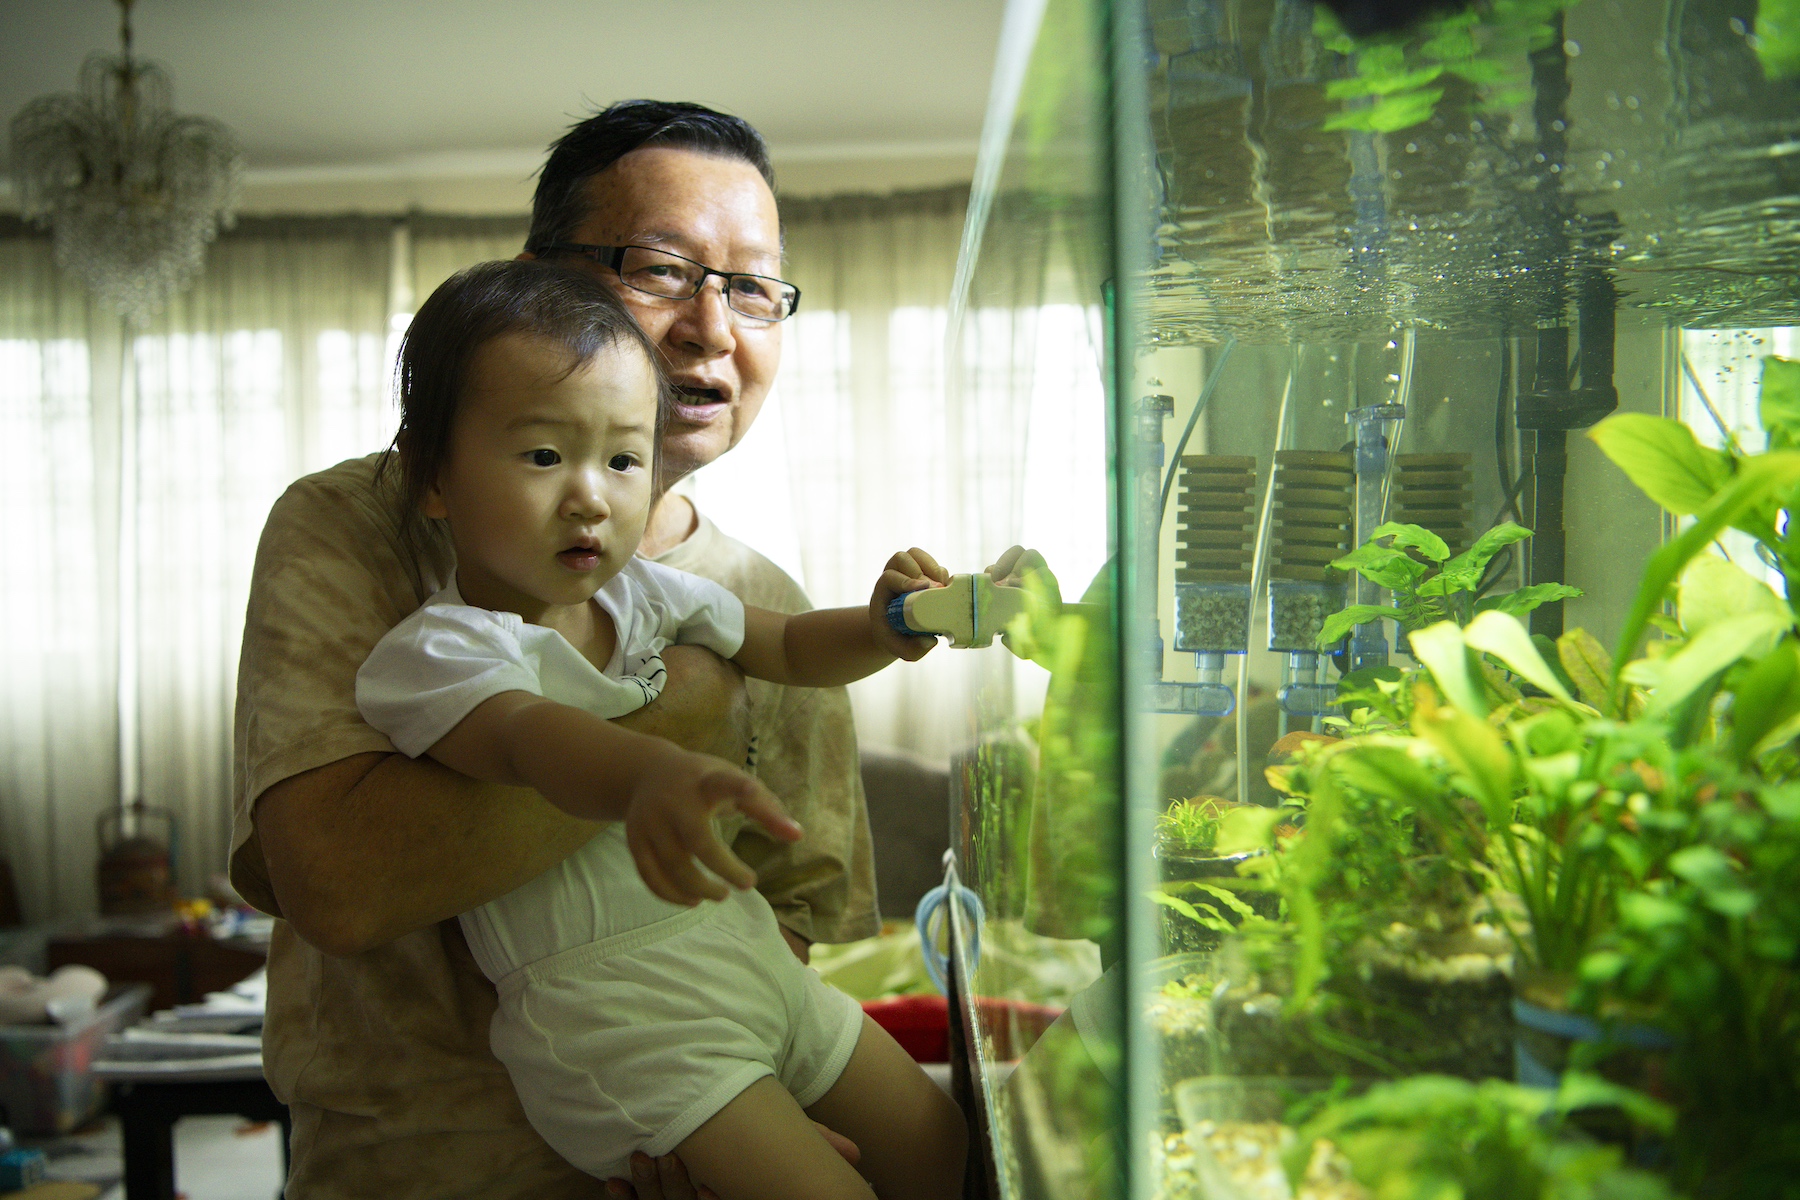 A grandfather holds his young granddaughter as they look at fish in a fish tank